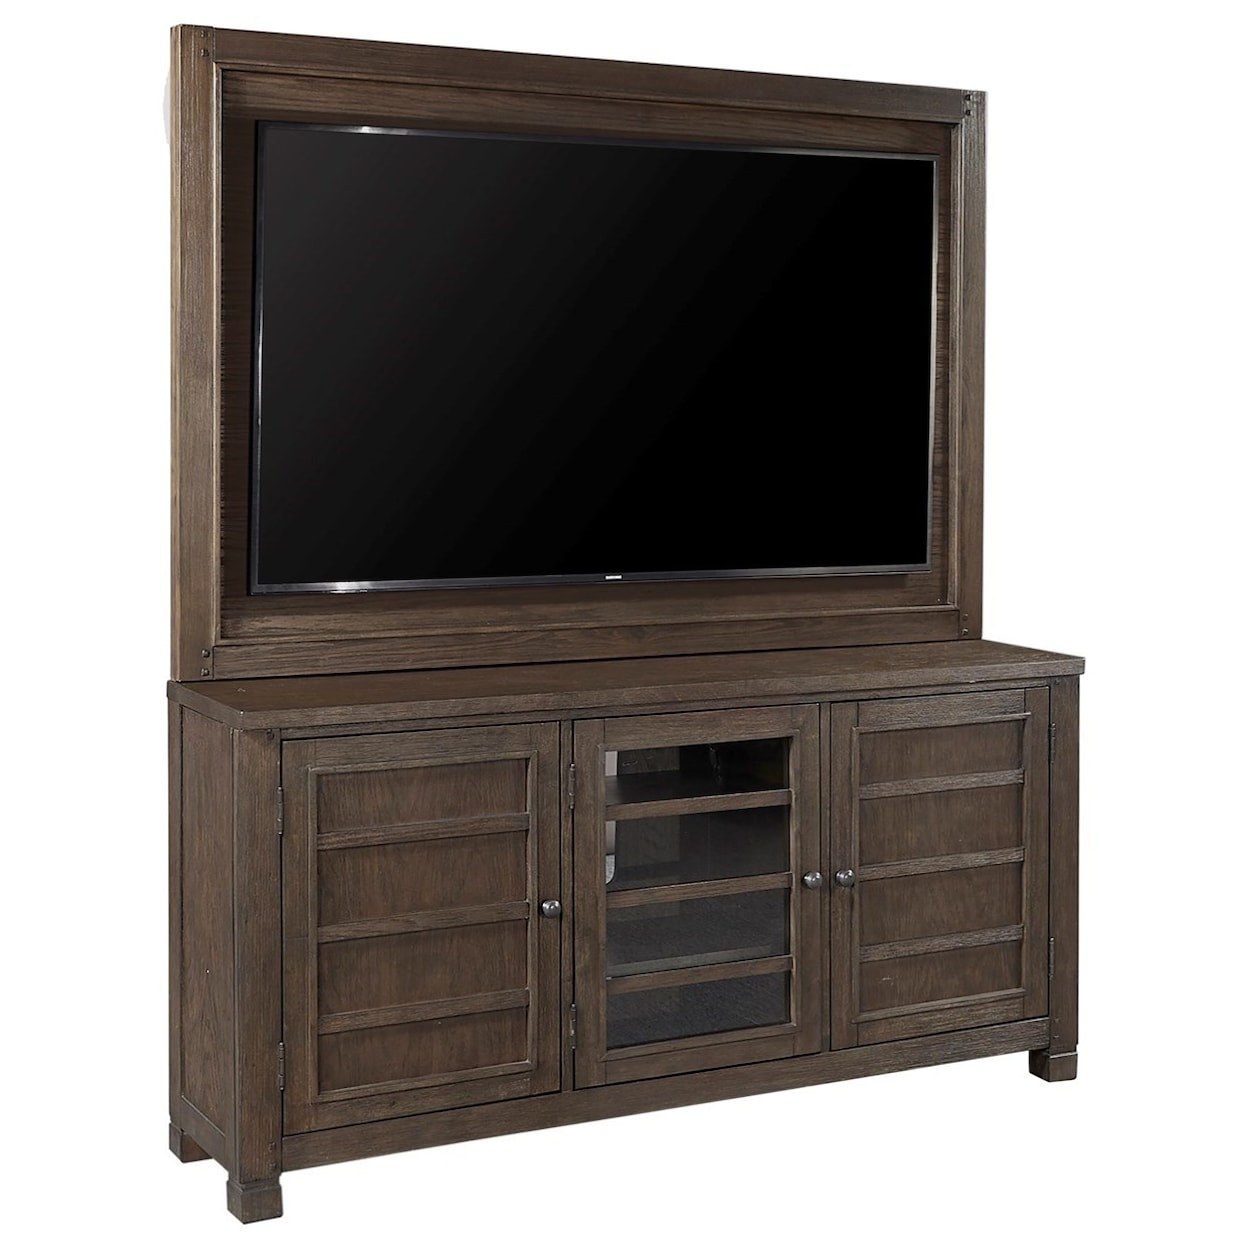 Aspenhome Tolsted 65" Console with TV Backer